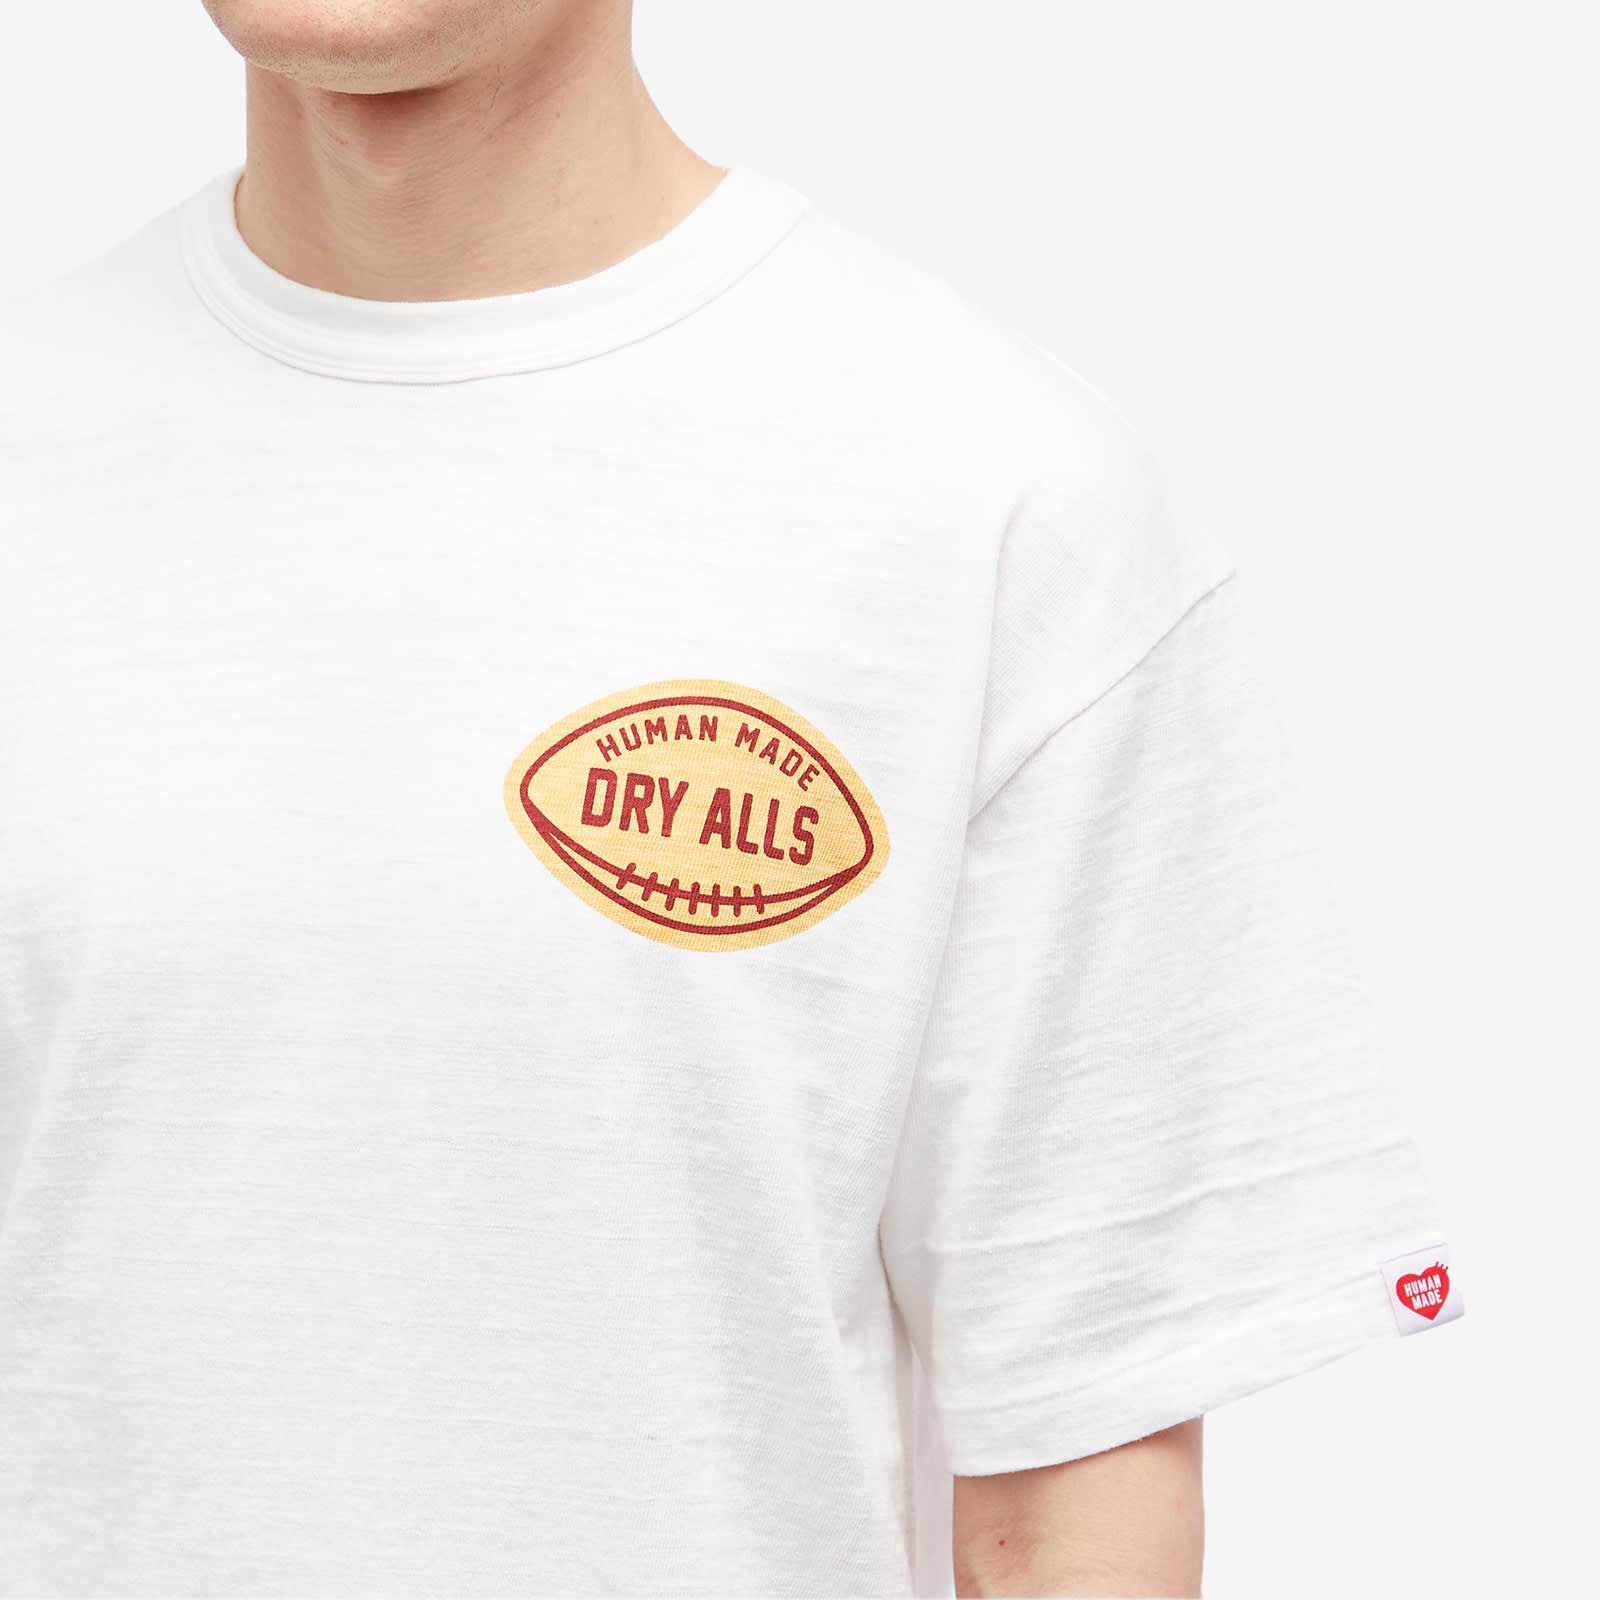 Human Made Dry Alls Past T-Shirt - 5